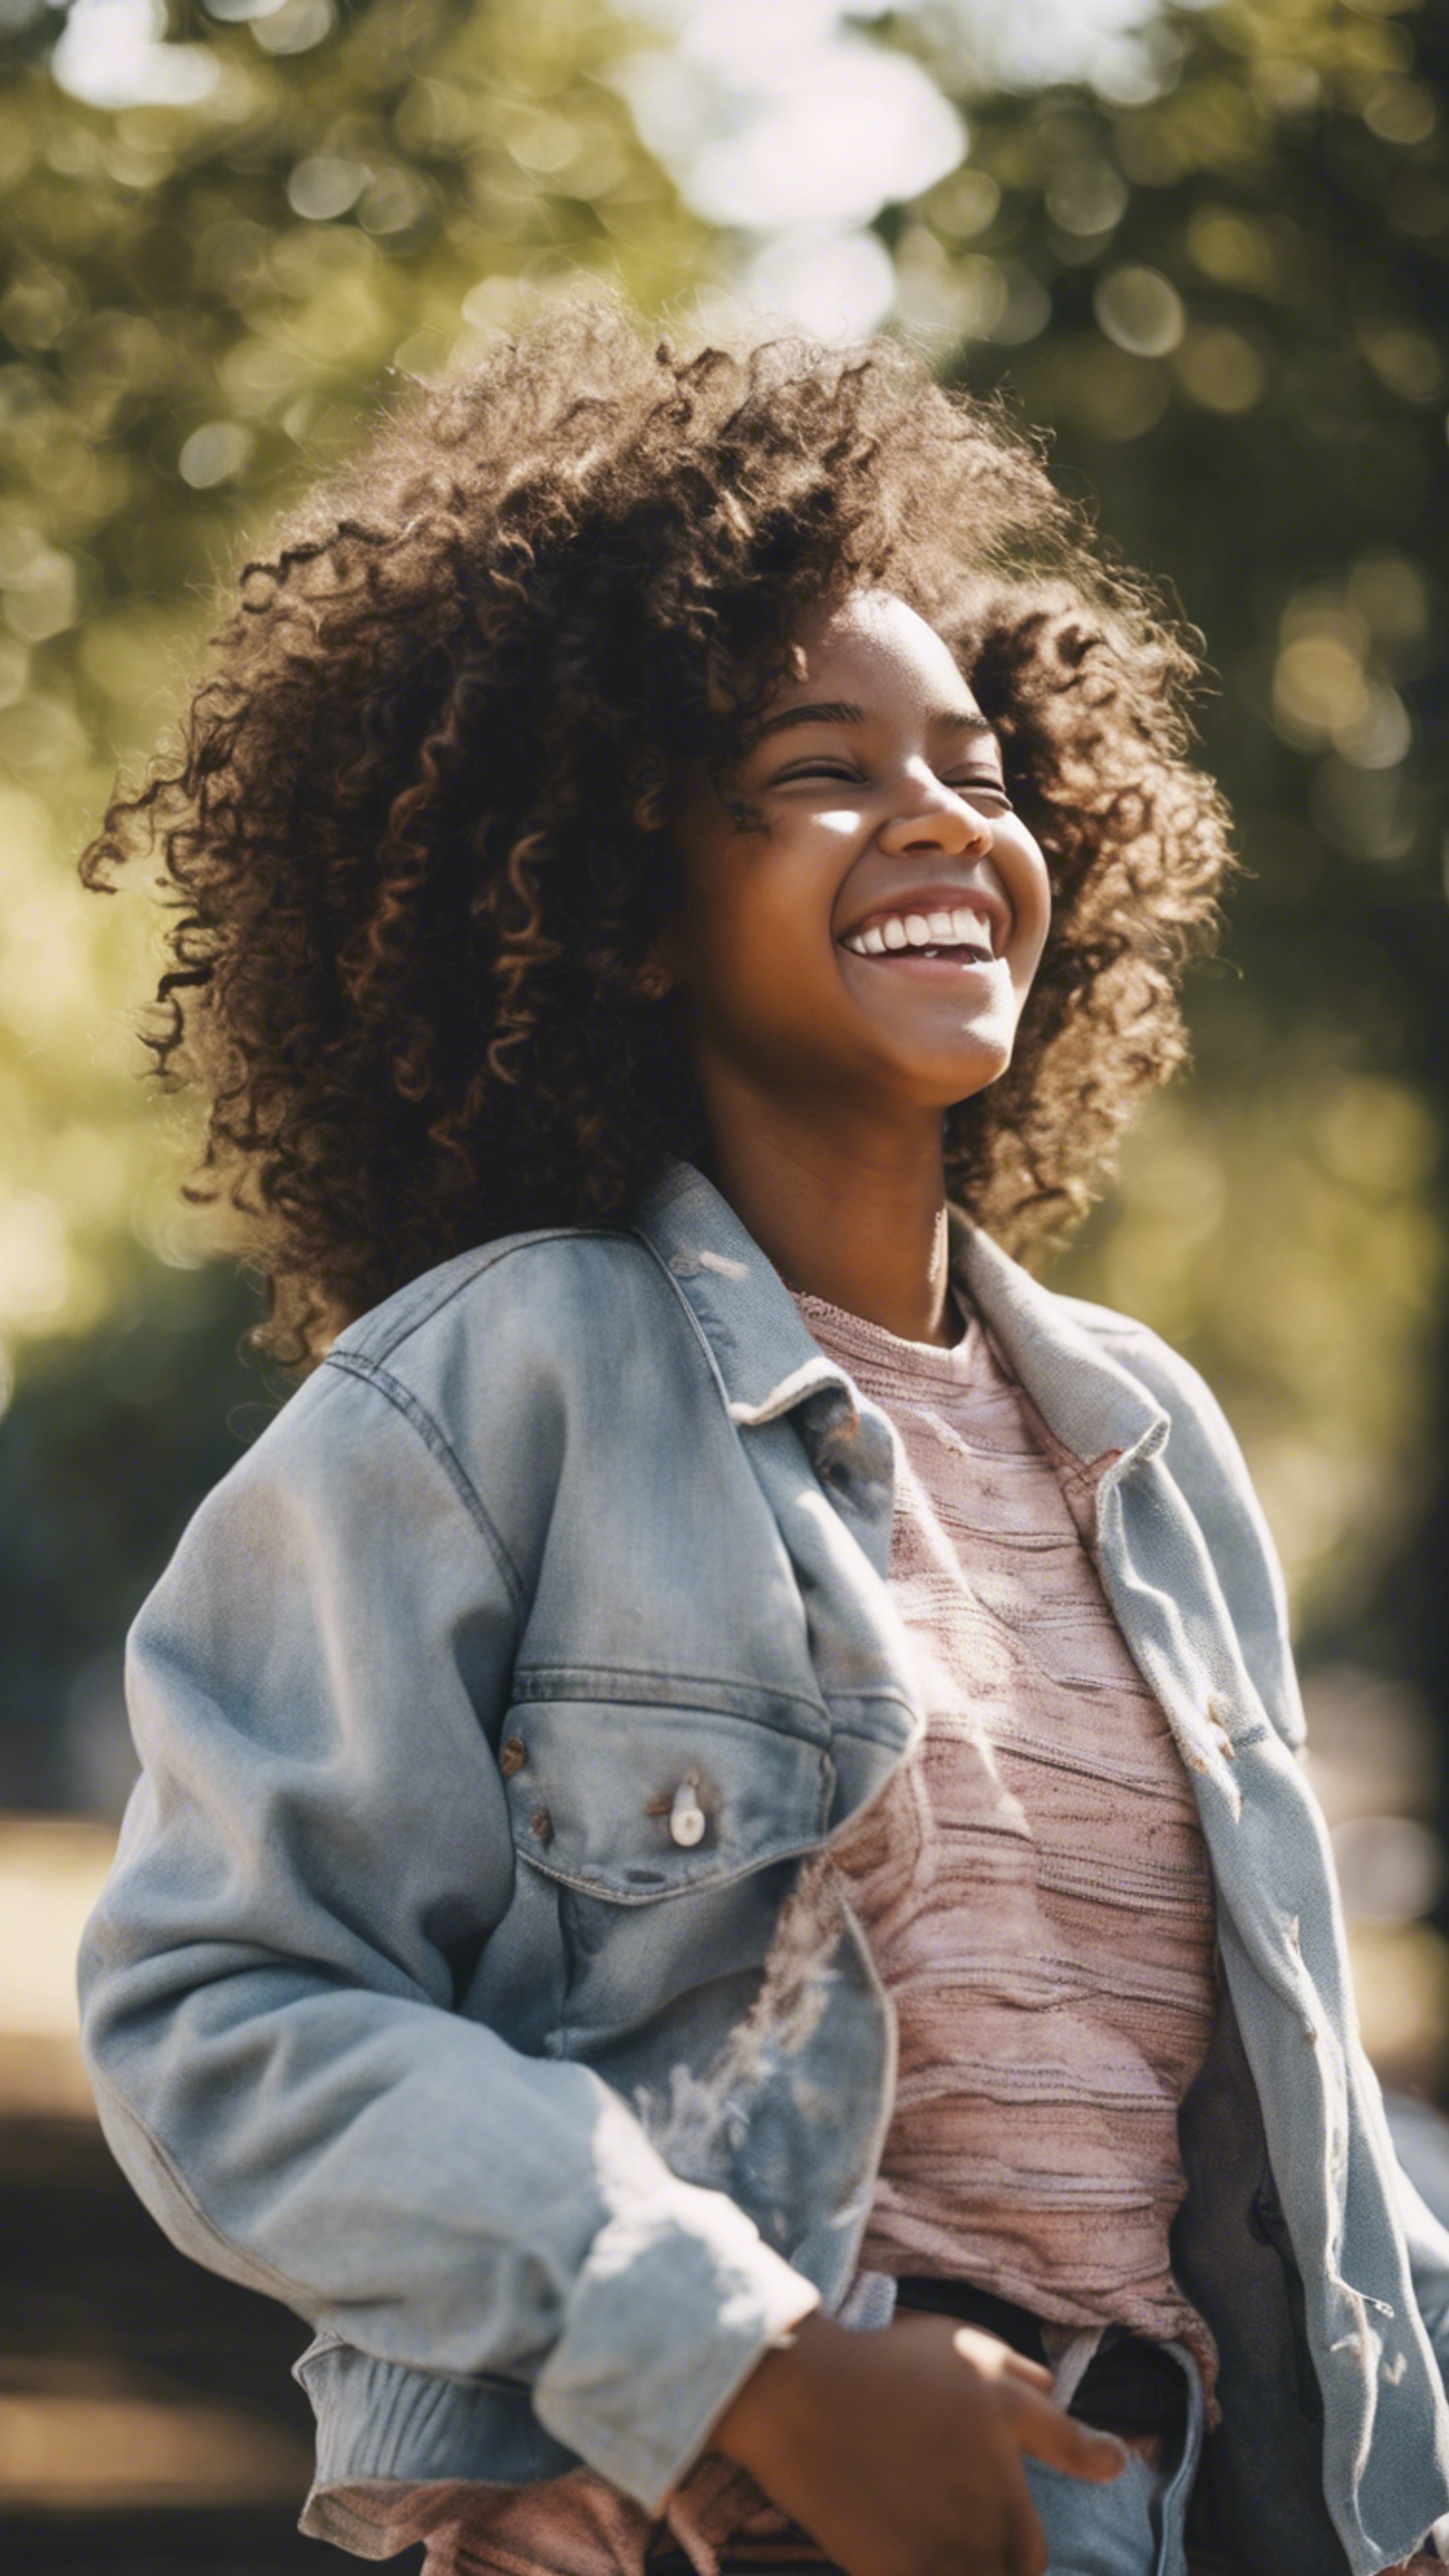 A confident young black girl with big, curly hair laughing while playing in a city park during a sunny afternoon. Тапет[a9bacc30abb04d56bfae]